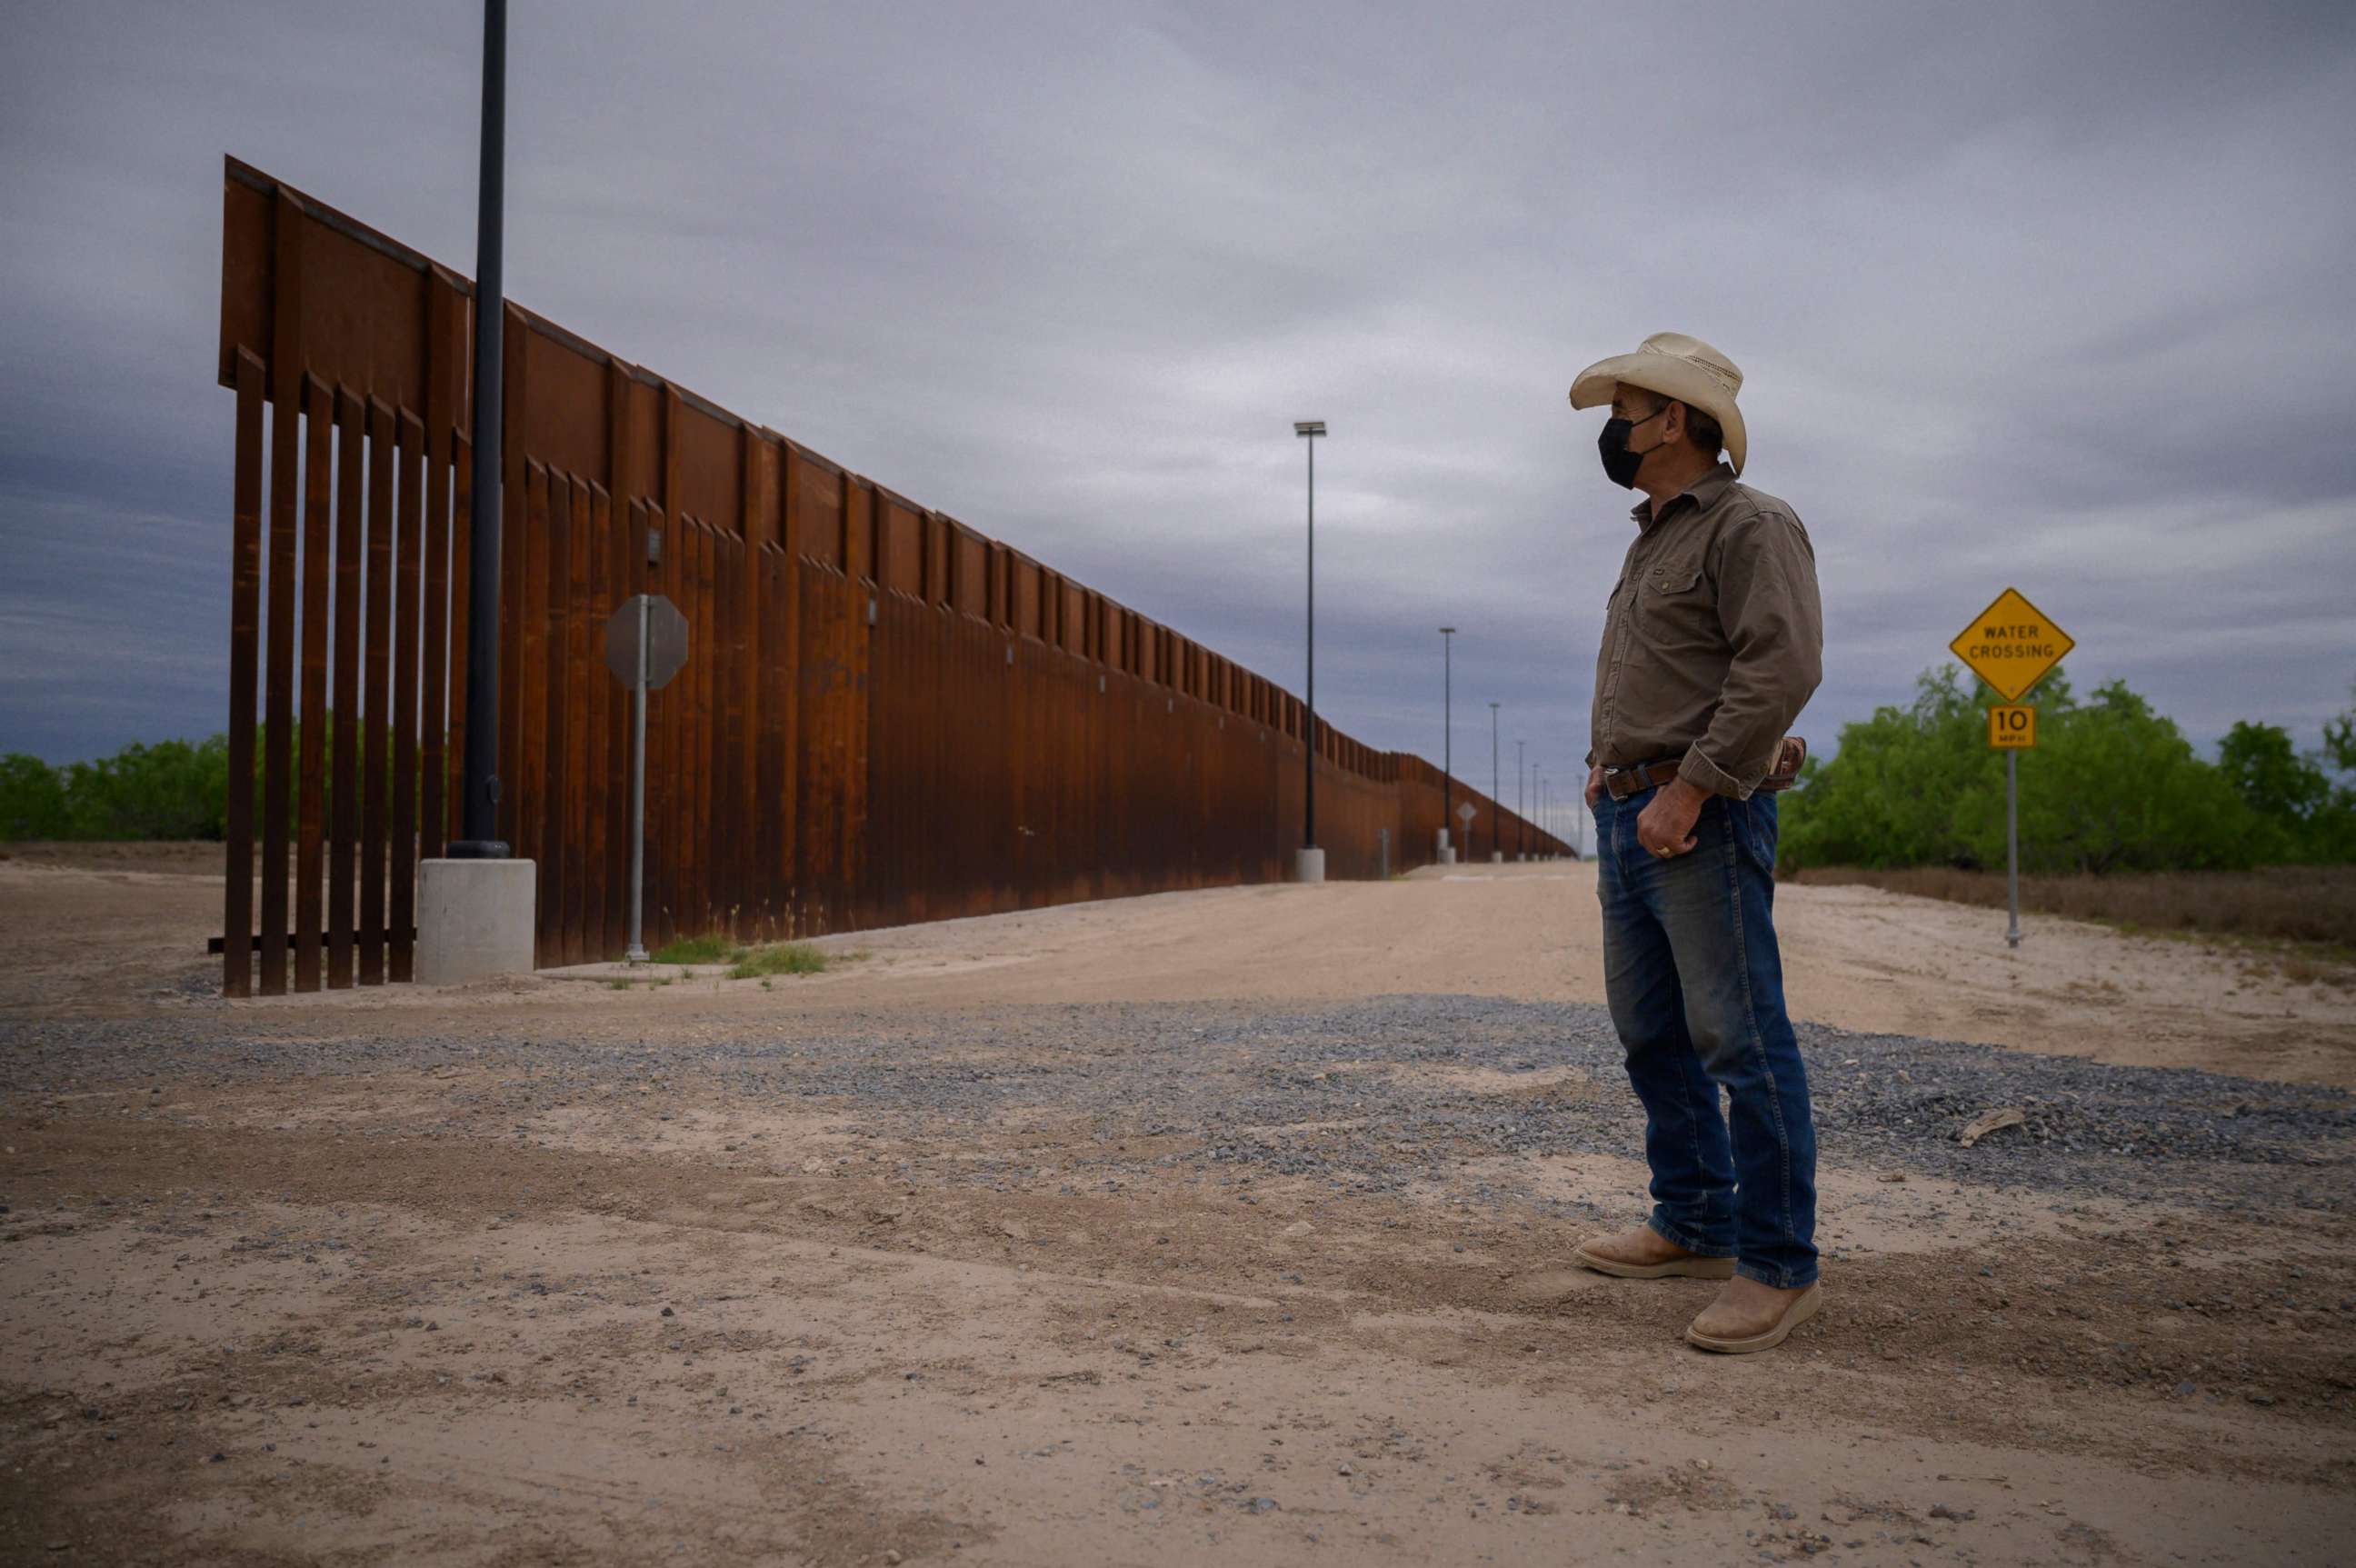 PHOTO: In a photo taken on March 28, 2021, ranch owner Tony Sandoval stands before a portion of the unfinished border wall that former President Donald Trump tried to build, near the southern Texas border city of Roma.